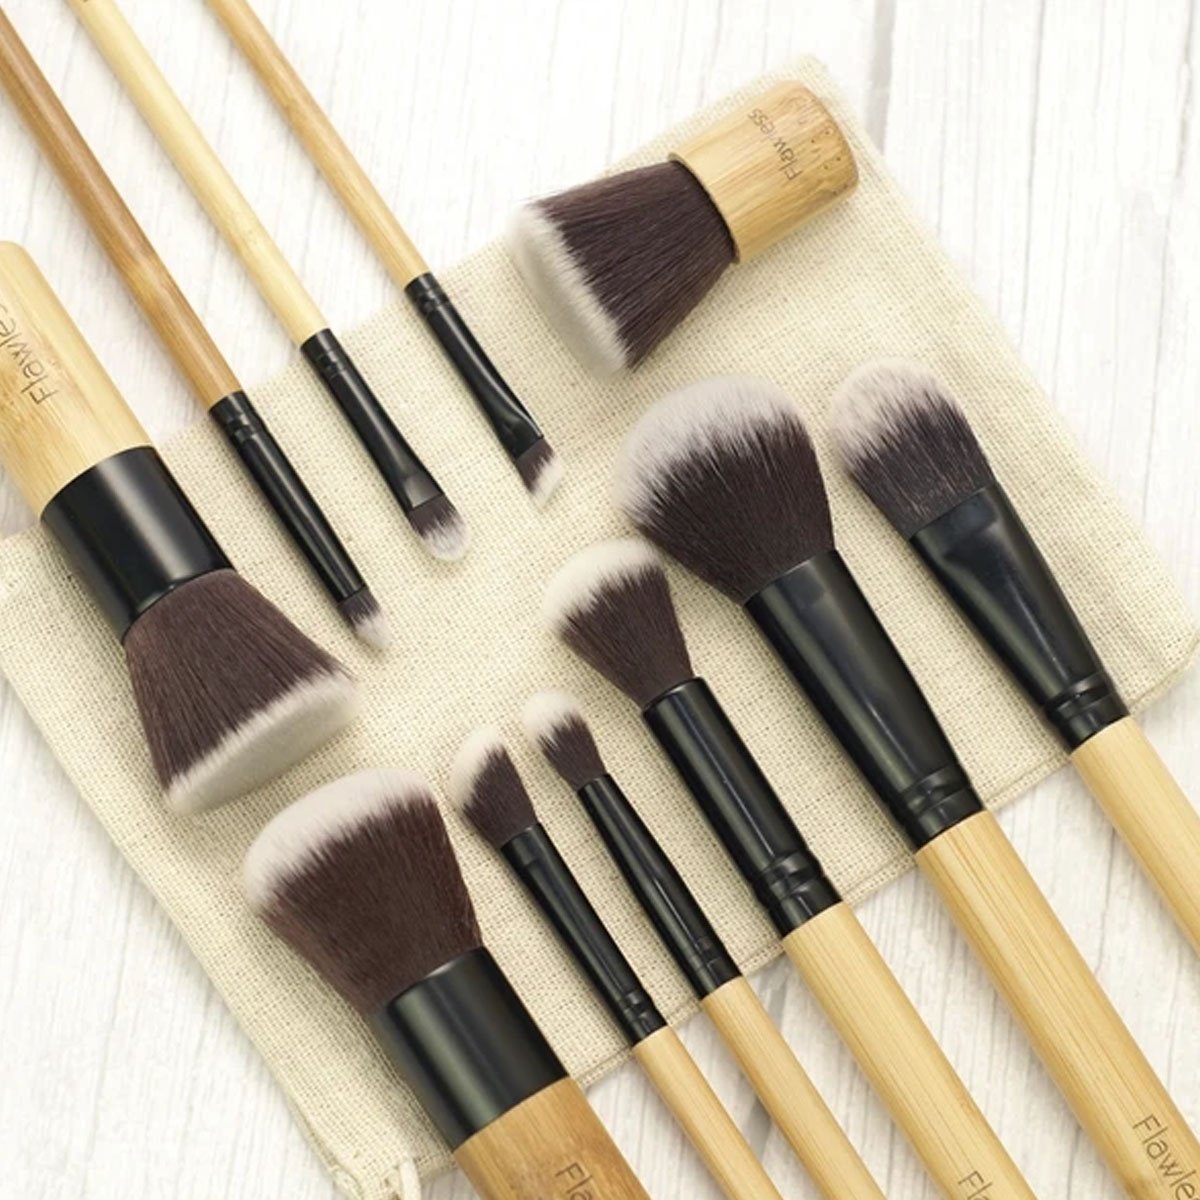 Flawless 11 Piece Bamboo Makeup Brush Set | Peace With The Wild